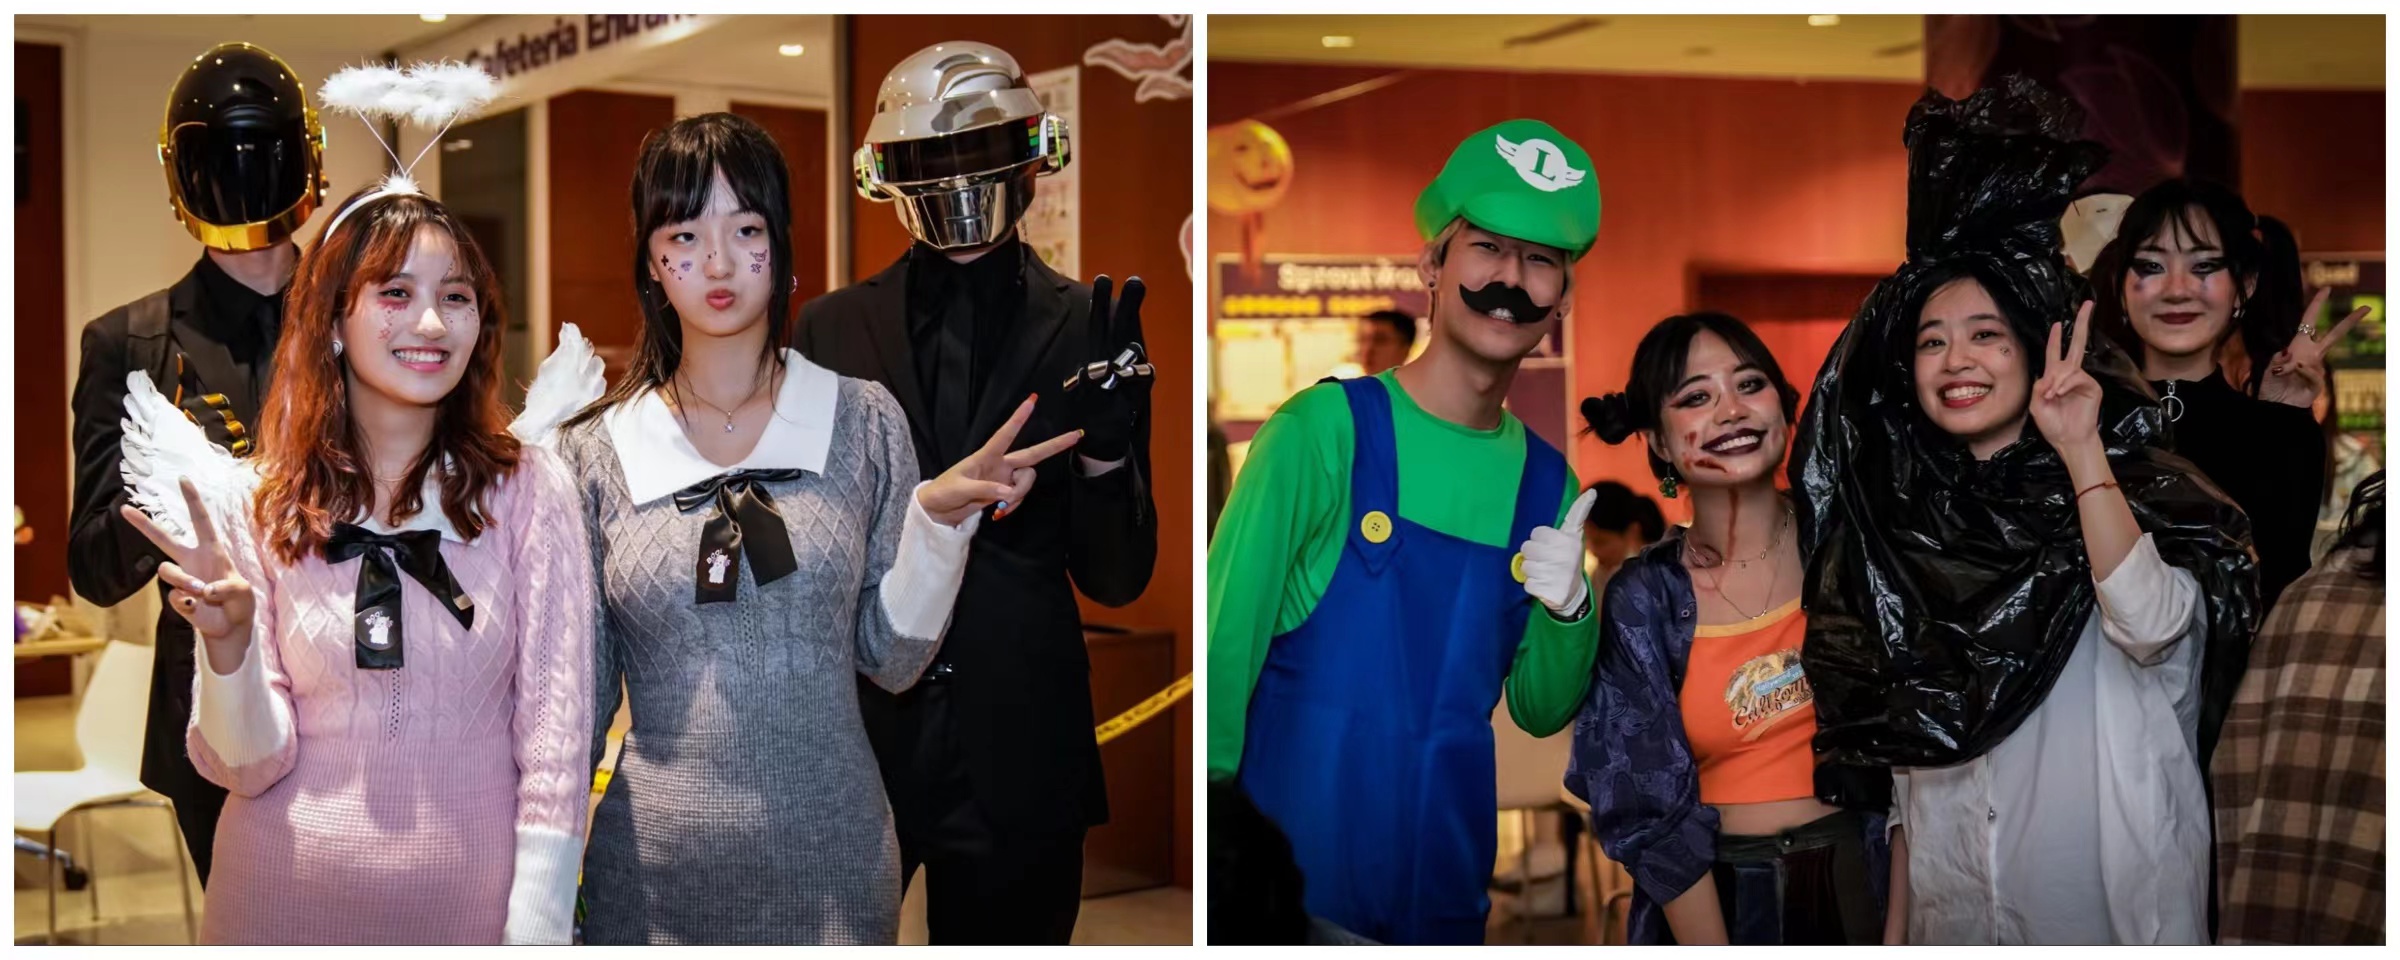 Students dressed in Halloween costumes